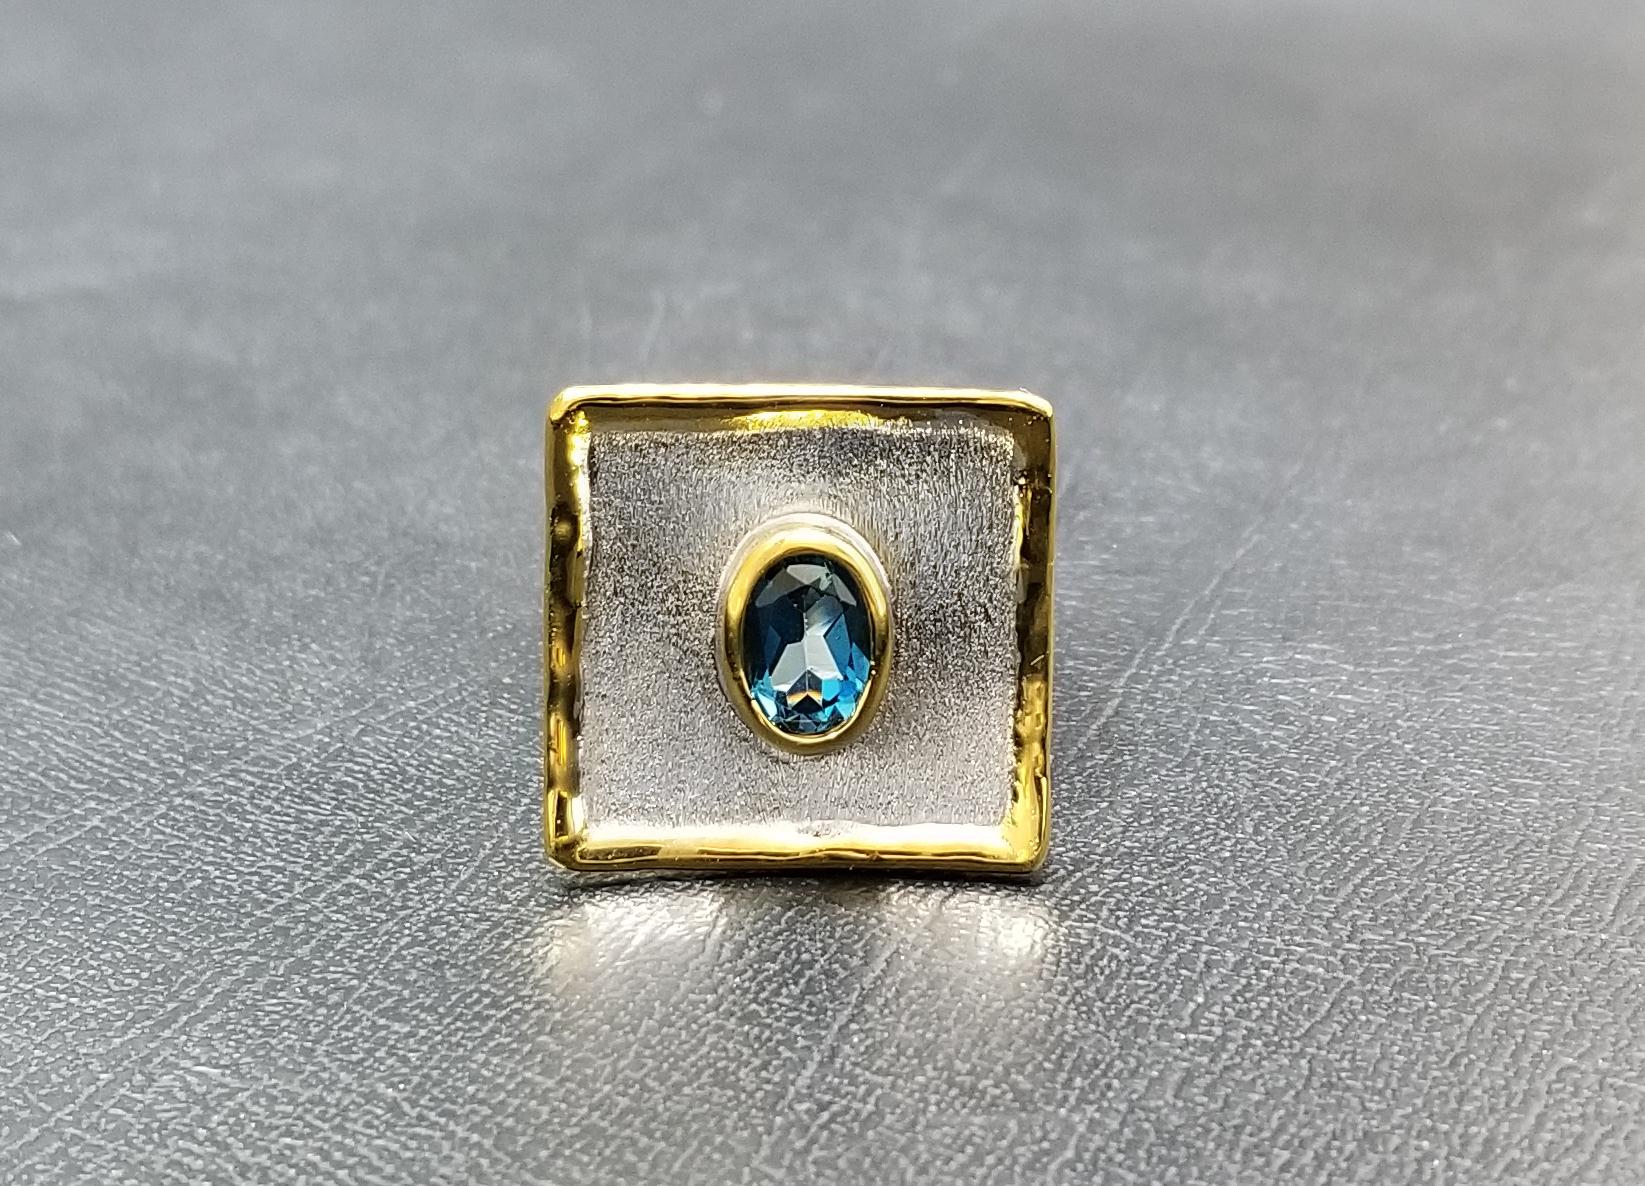 This is Yianni Creations Midas Collection 100% handmade artisan ring from fine silver with palladium plate to resist elements.  This geometric-shaped ring features a 1.60 Carat oval-shape London blue topaz complemented by unique liquid edges plated